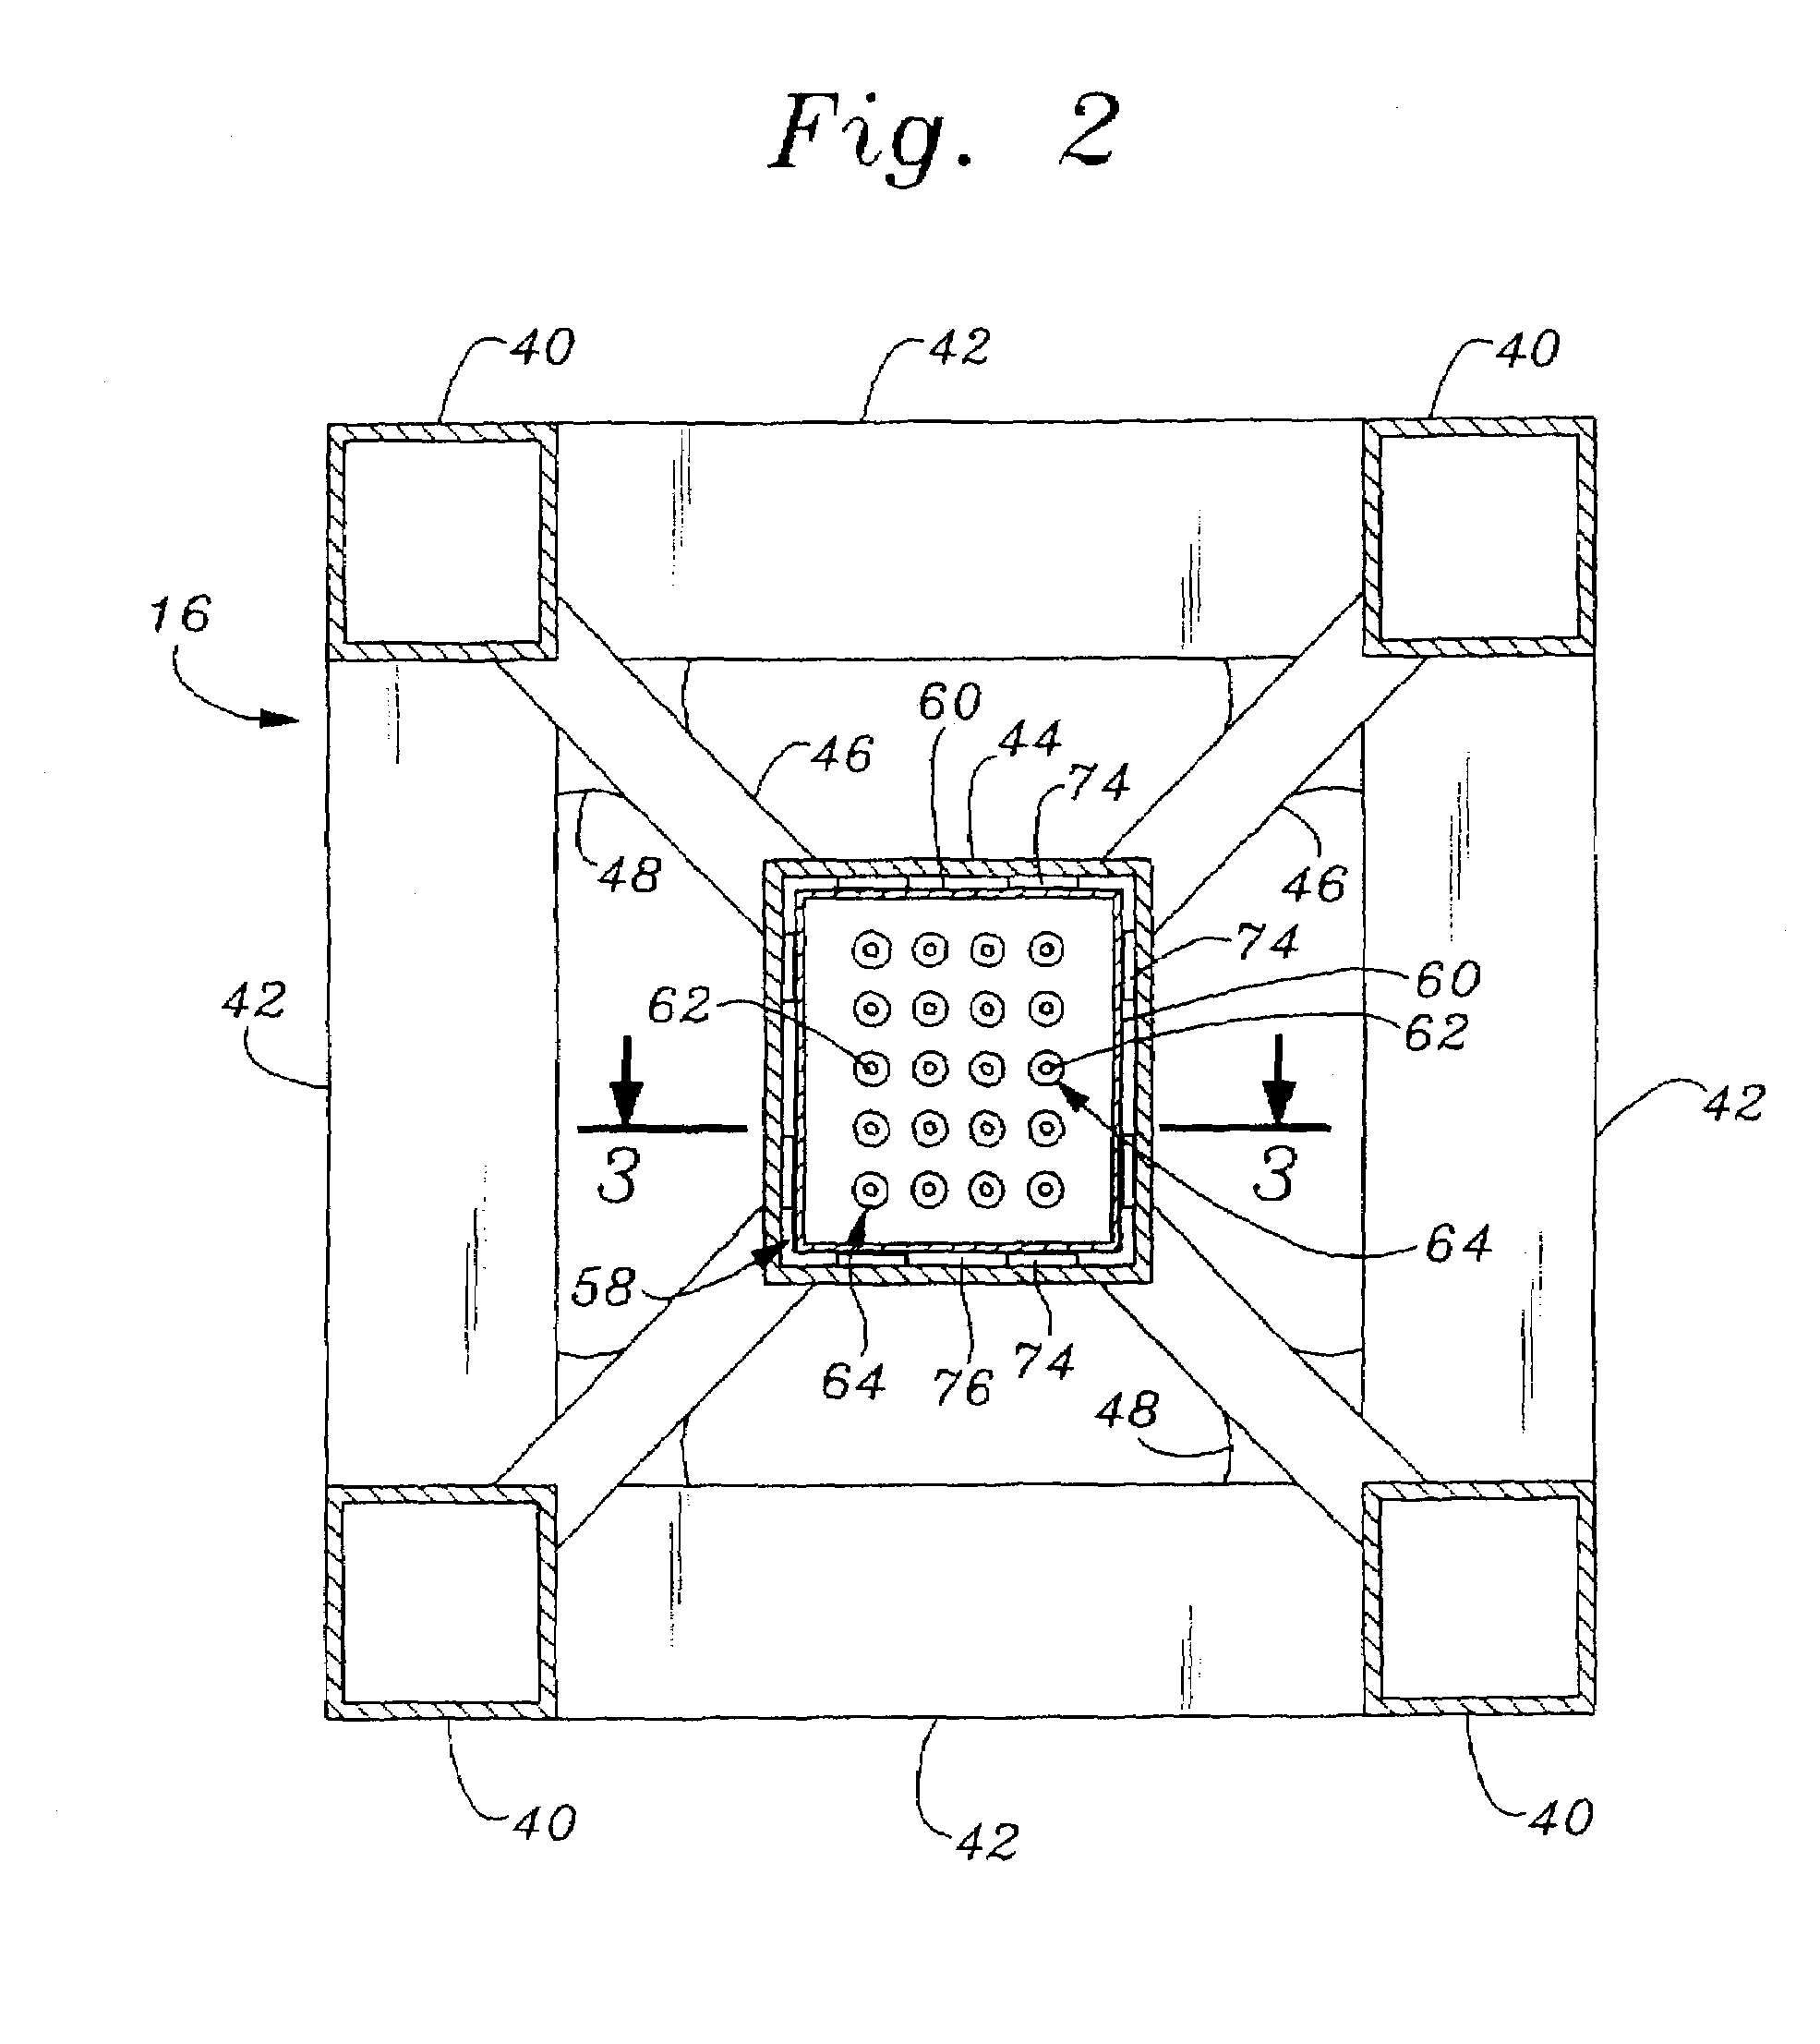 Riser support system for use with an offshore platform